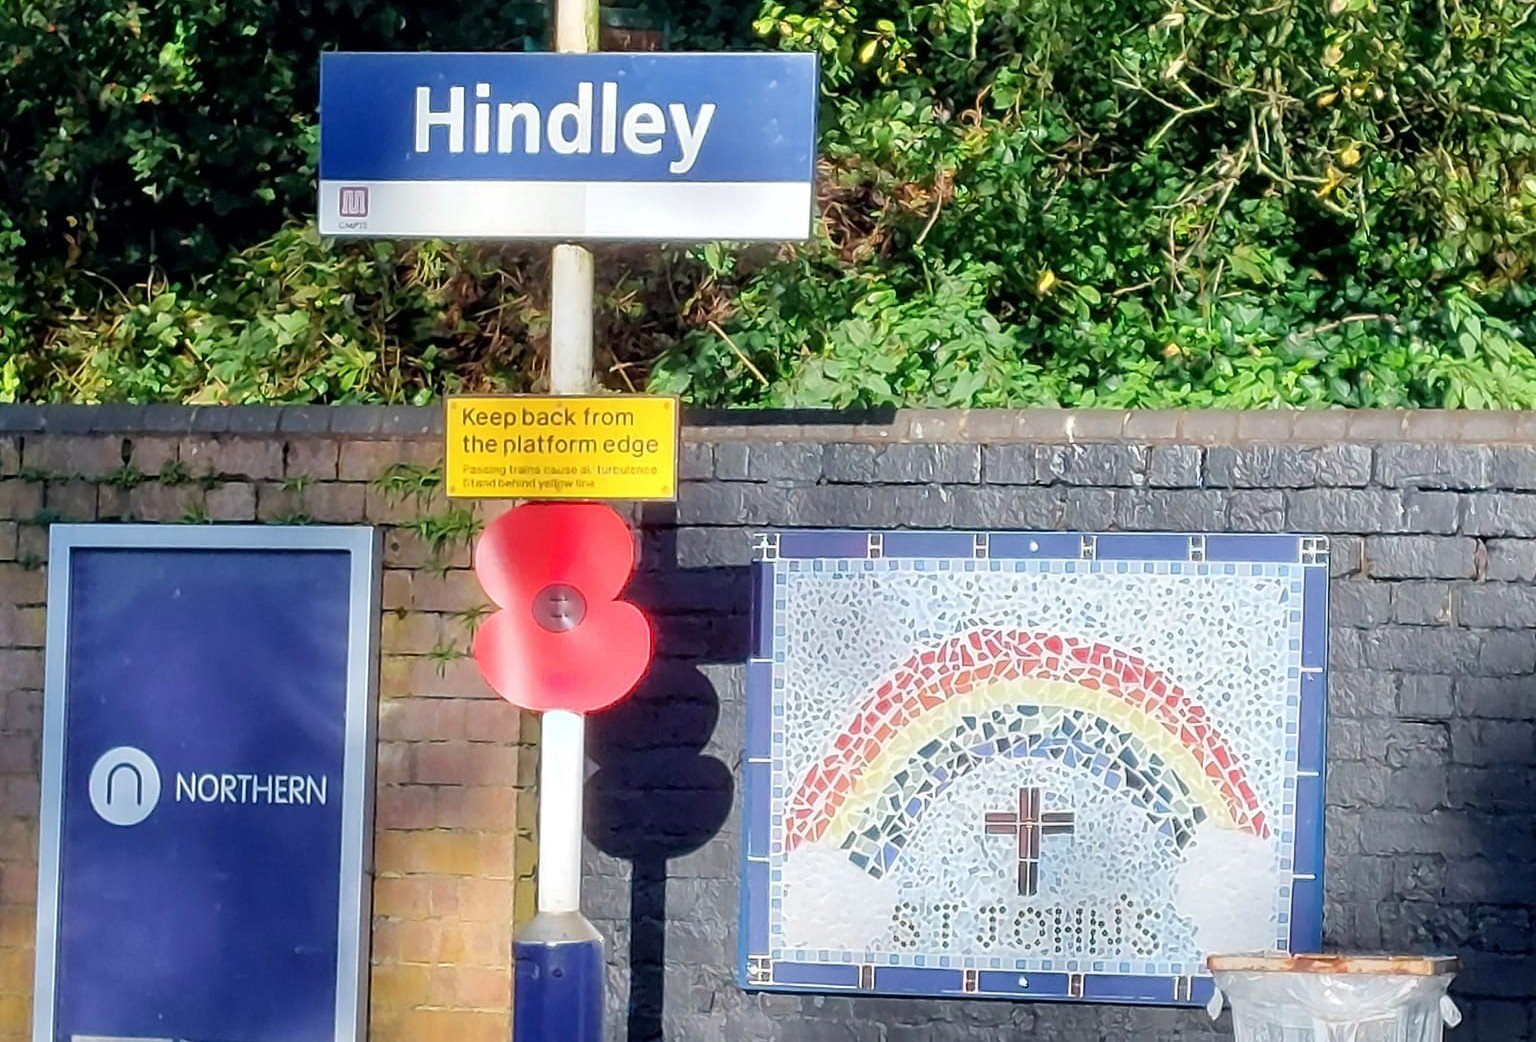 image-shows-hindley-station